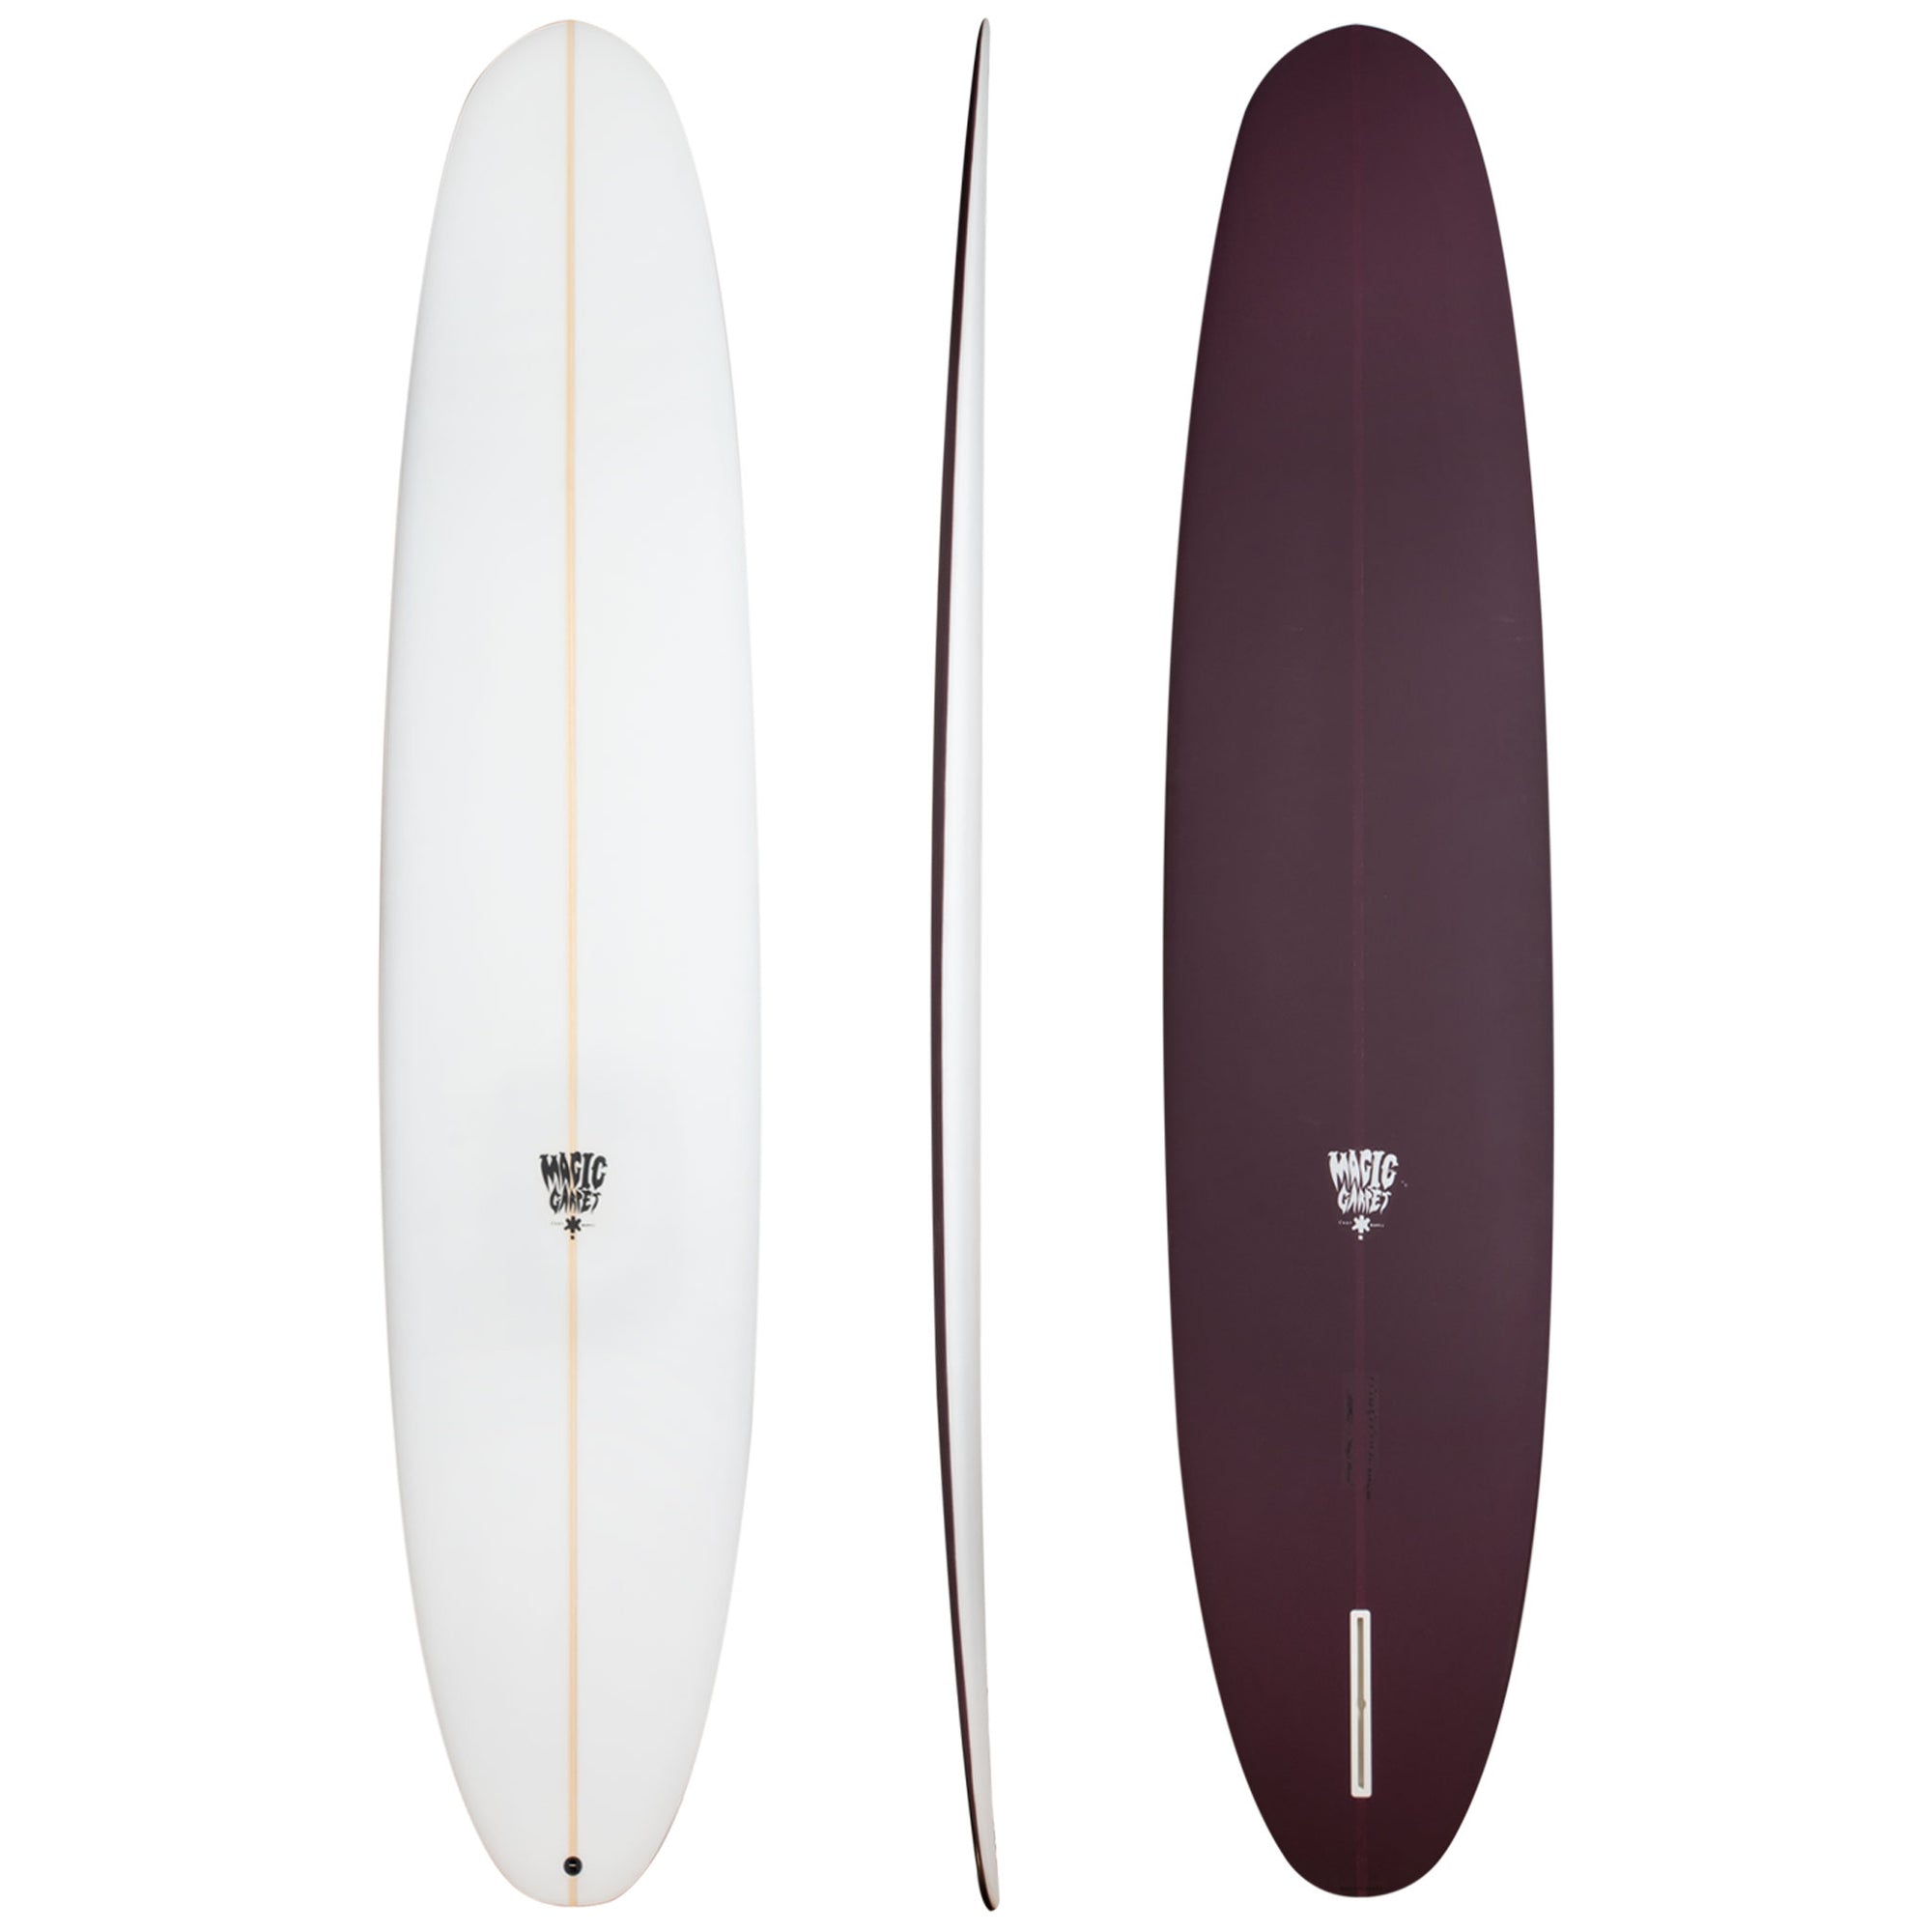 Products - Magic Carpet Surfboards